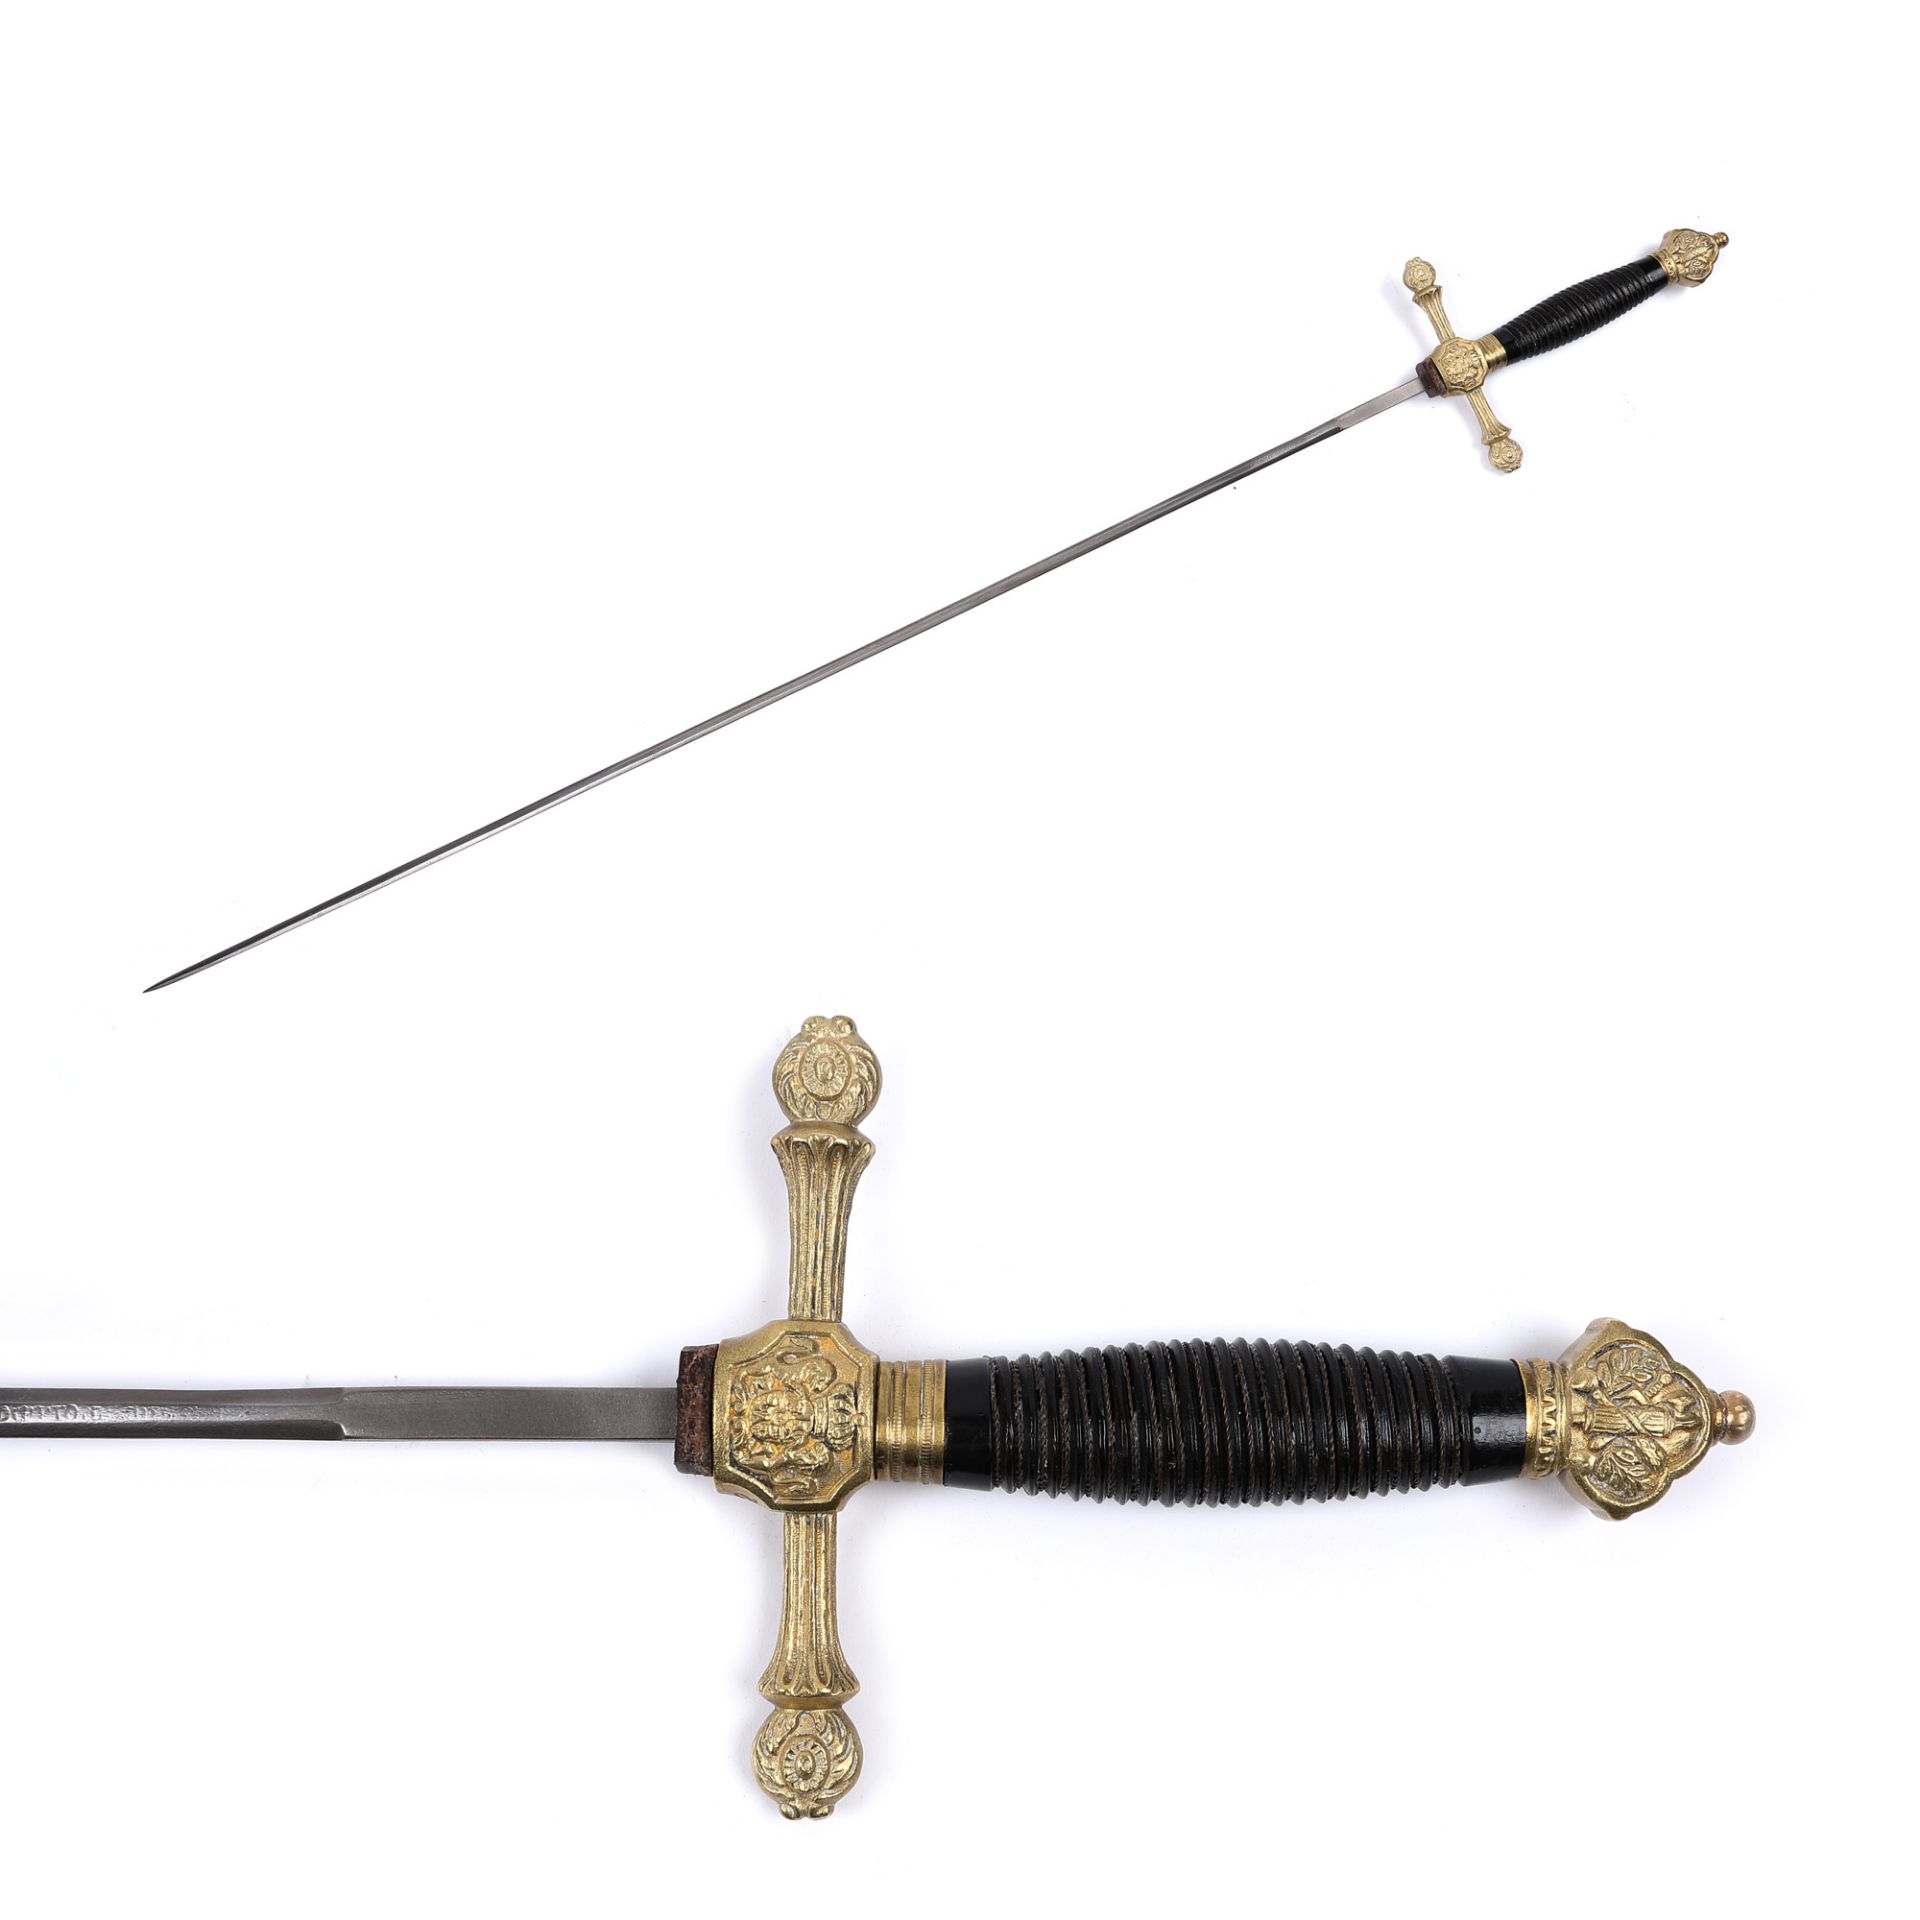 Officer's rapier, Spain, second half of the 19th century